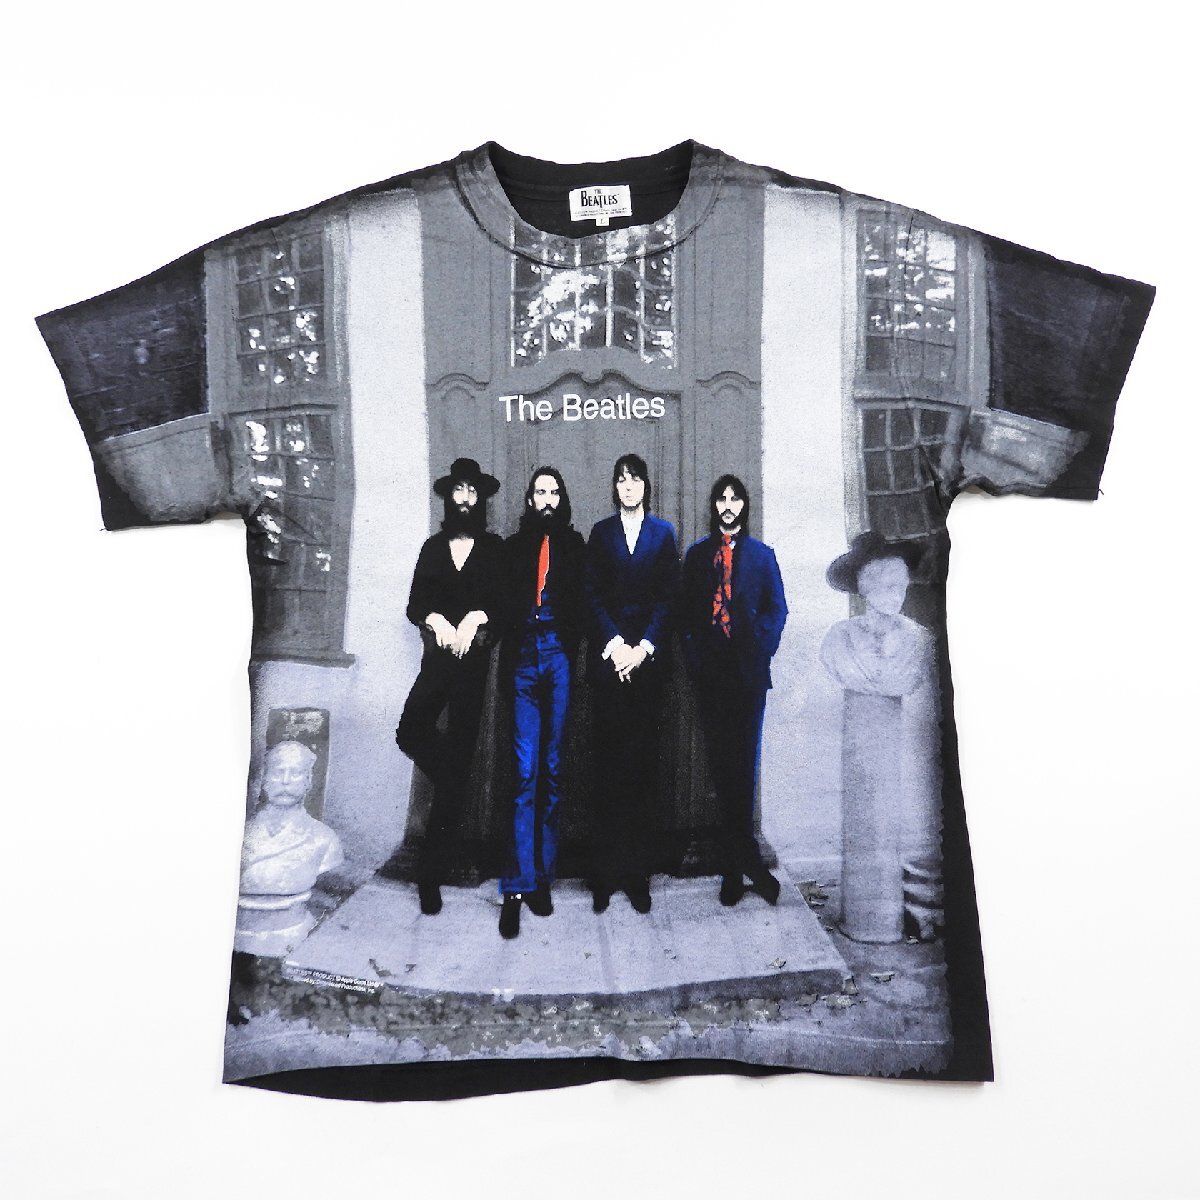 90's The Beatles ビートルズ all over バンド Tシャツ USA製 size L #19267 送料360円 オールド ロック アメリカ製 米国製 プリント_画像1